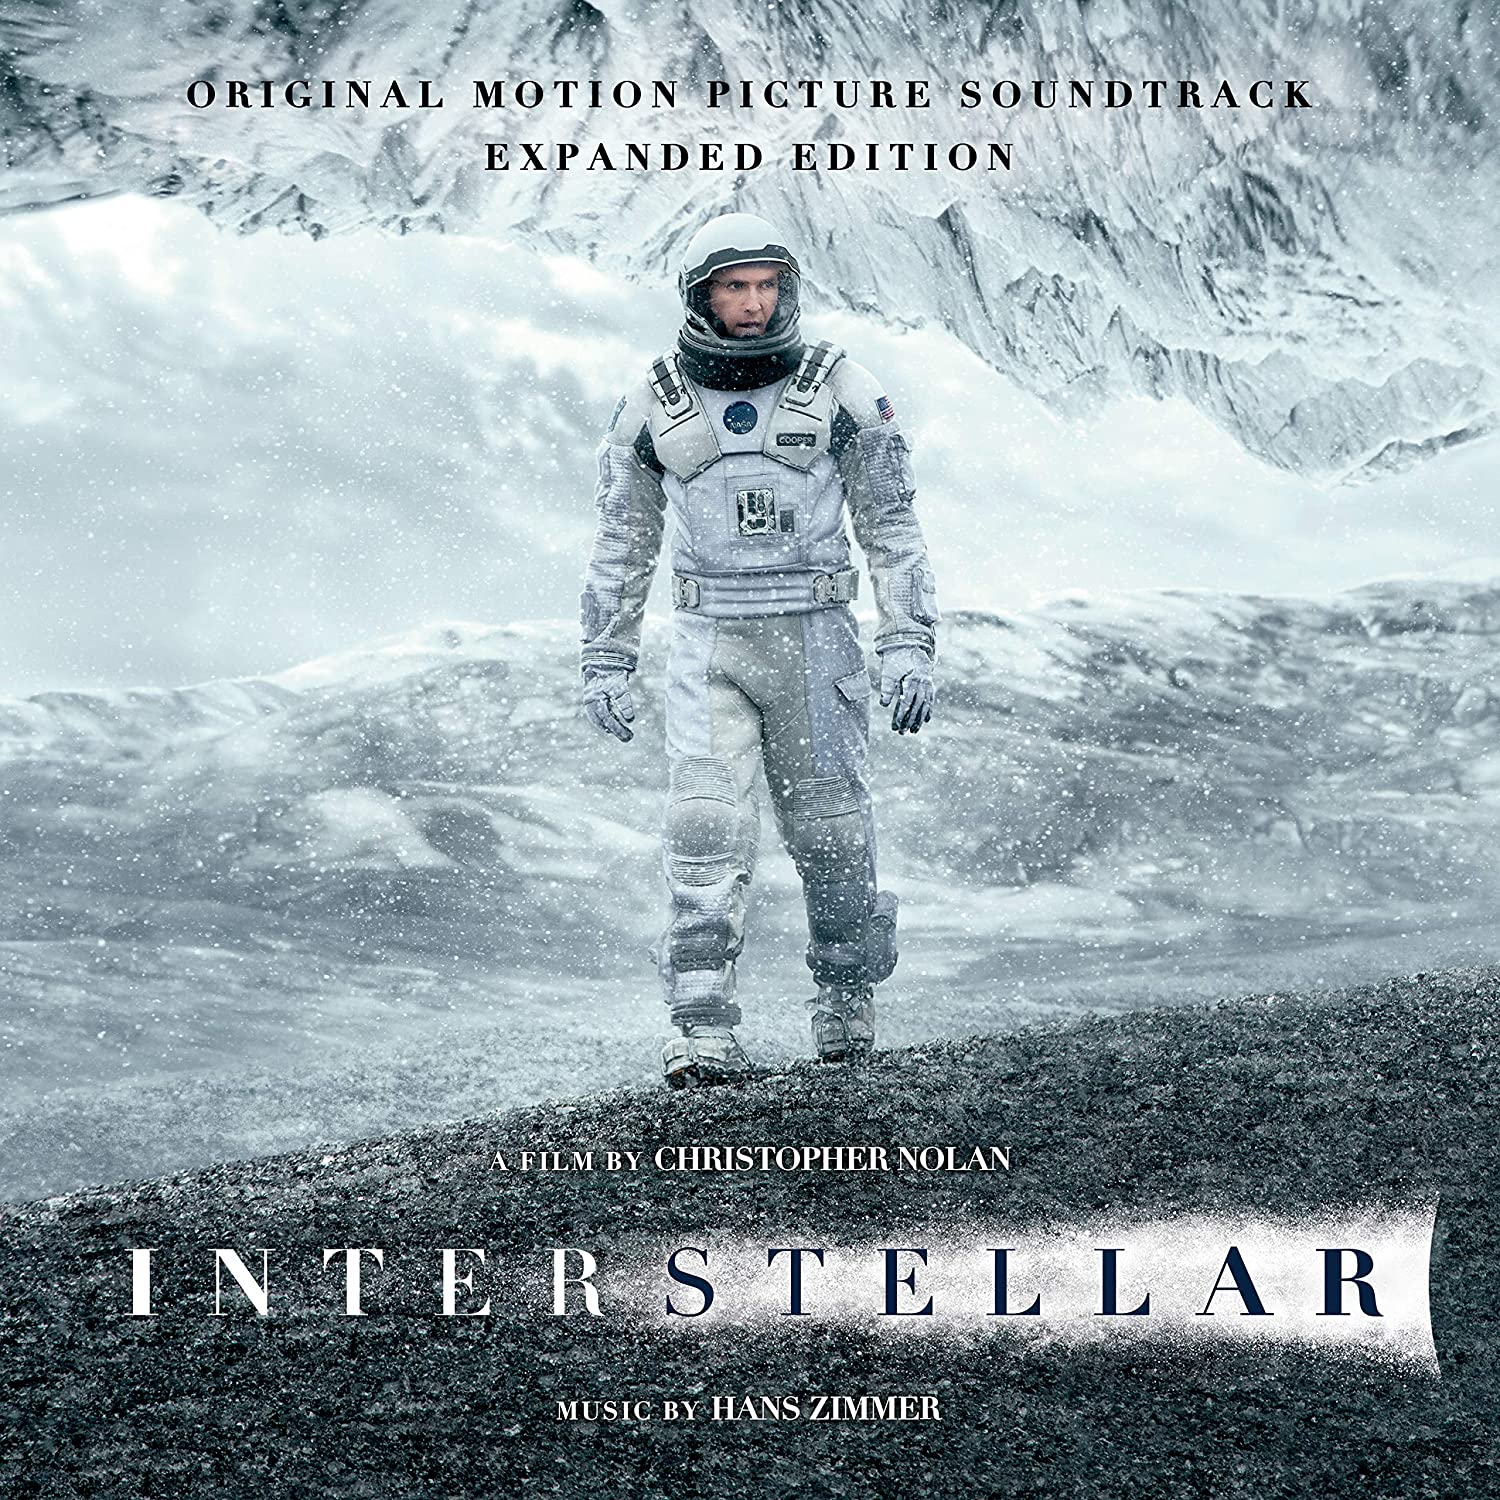 The Interstellar Expanded Edition